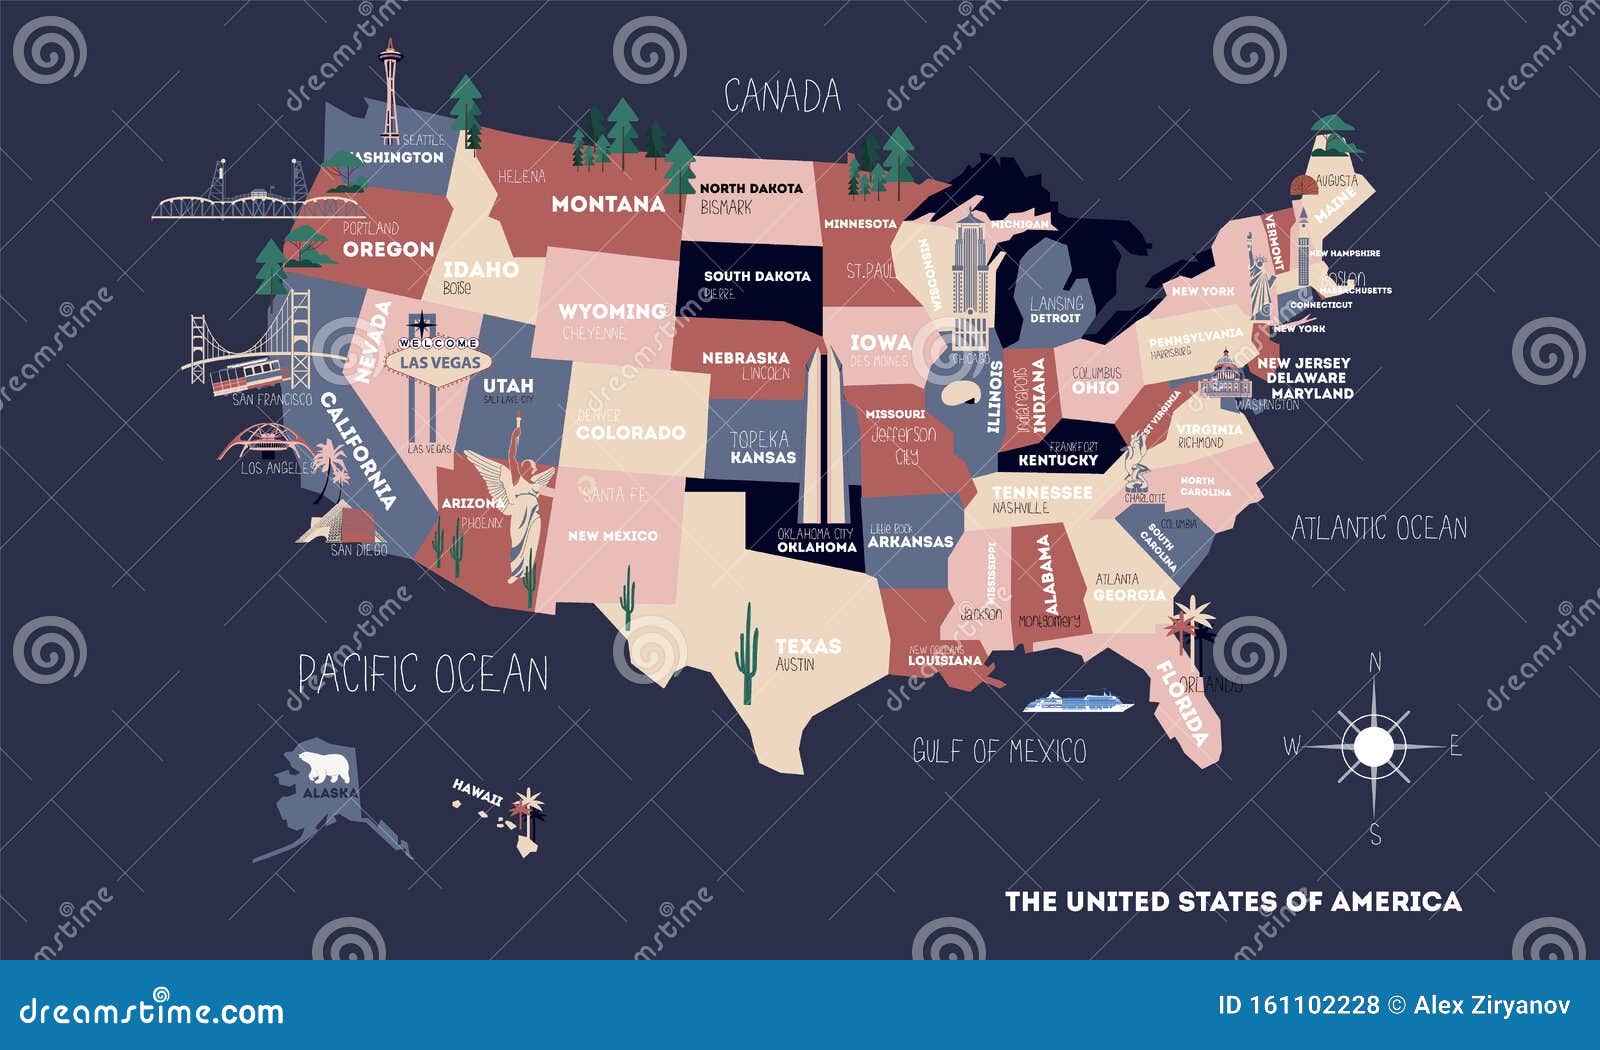 Poster Map Of United States Of America With State Names Usa Cartoon